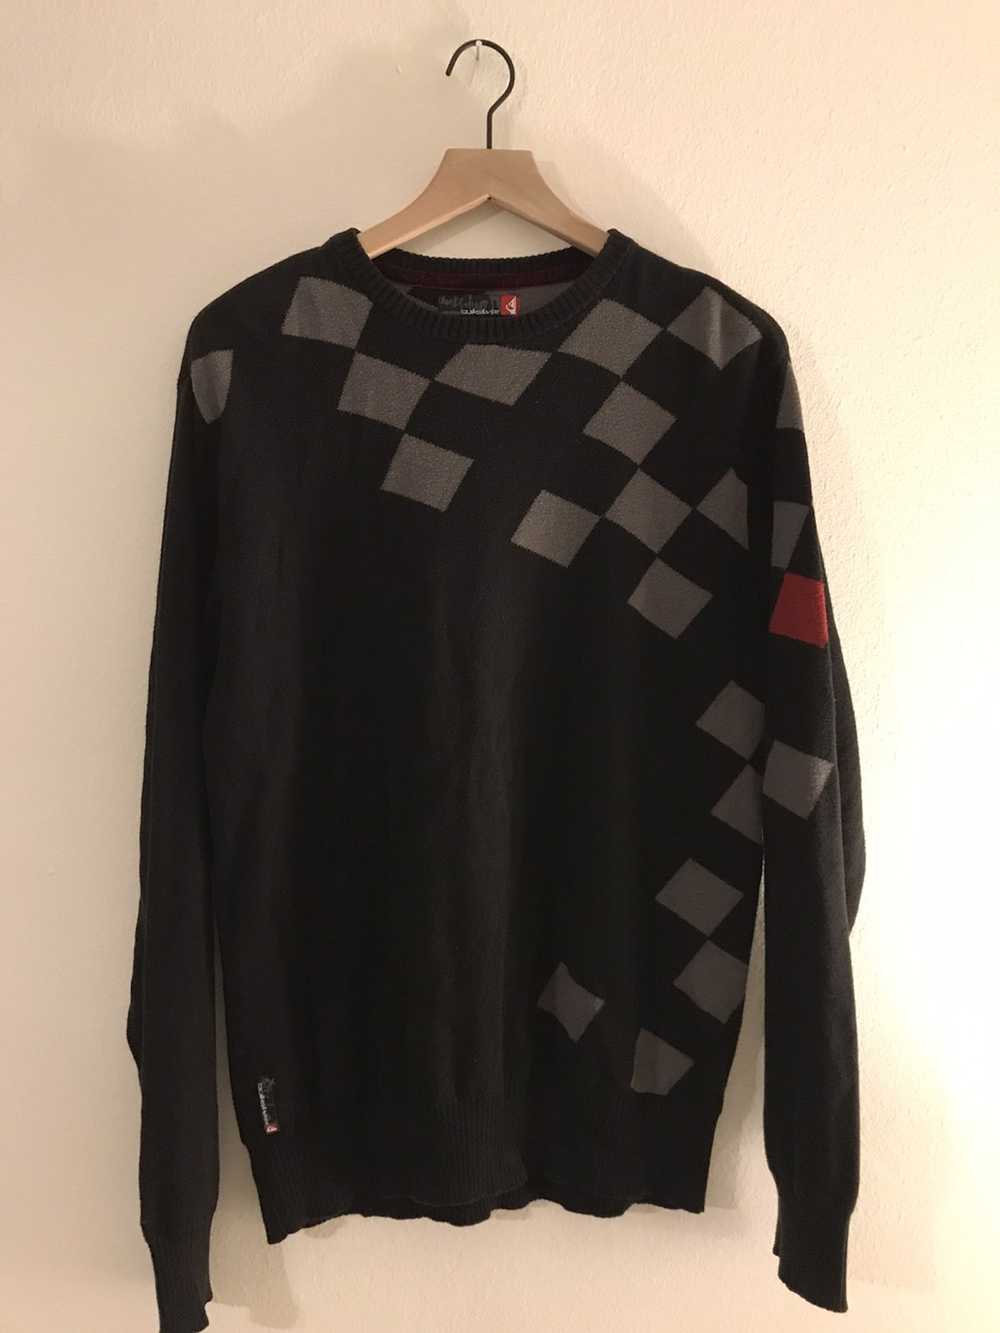 Quiksilver Checked Sweater Size Medium - image 1